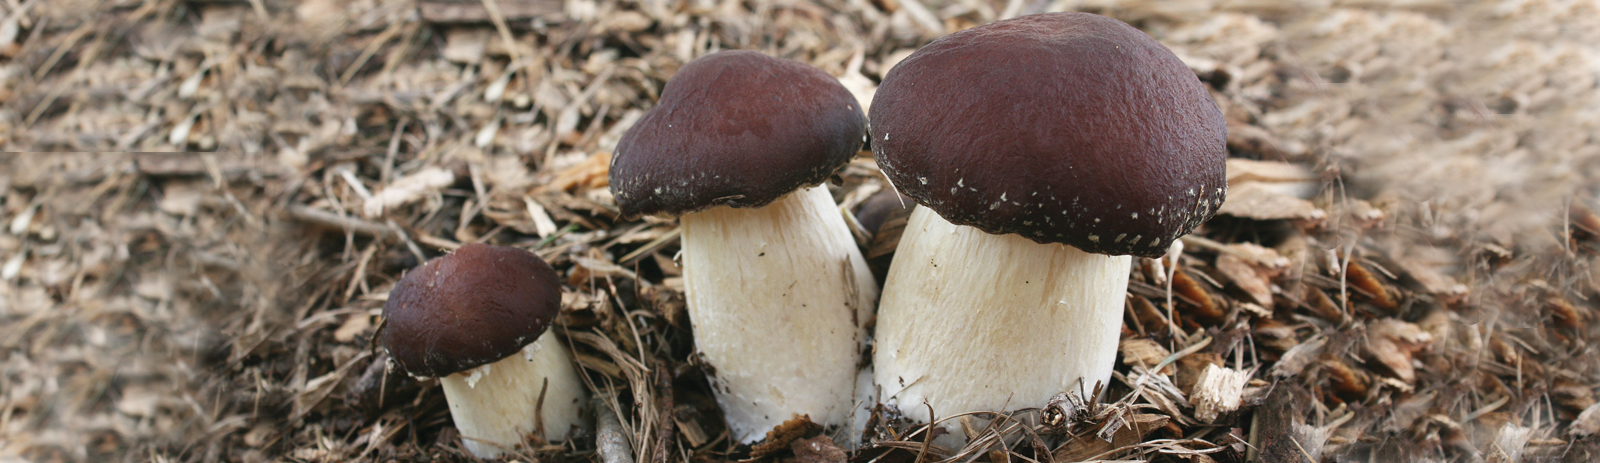 Wine Cap Stropharia growing on wood chips